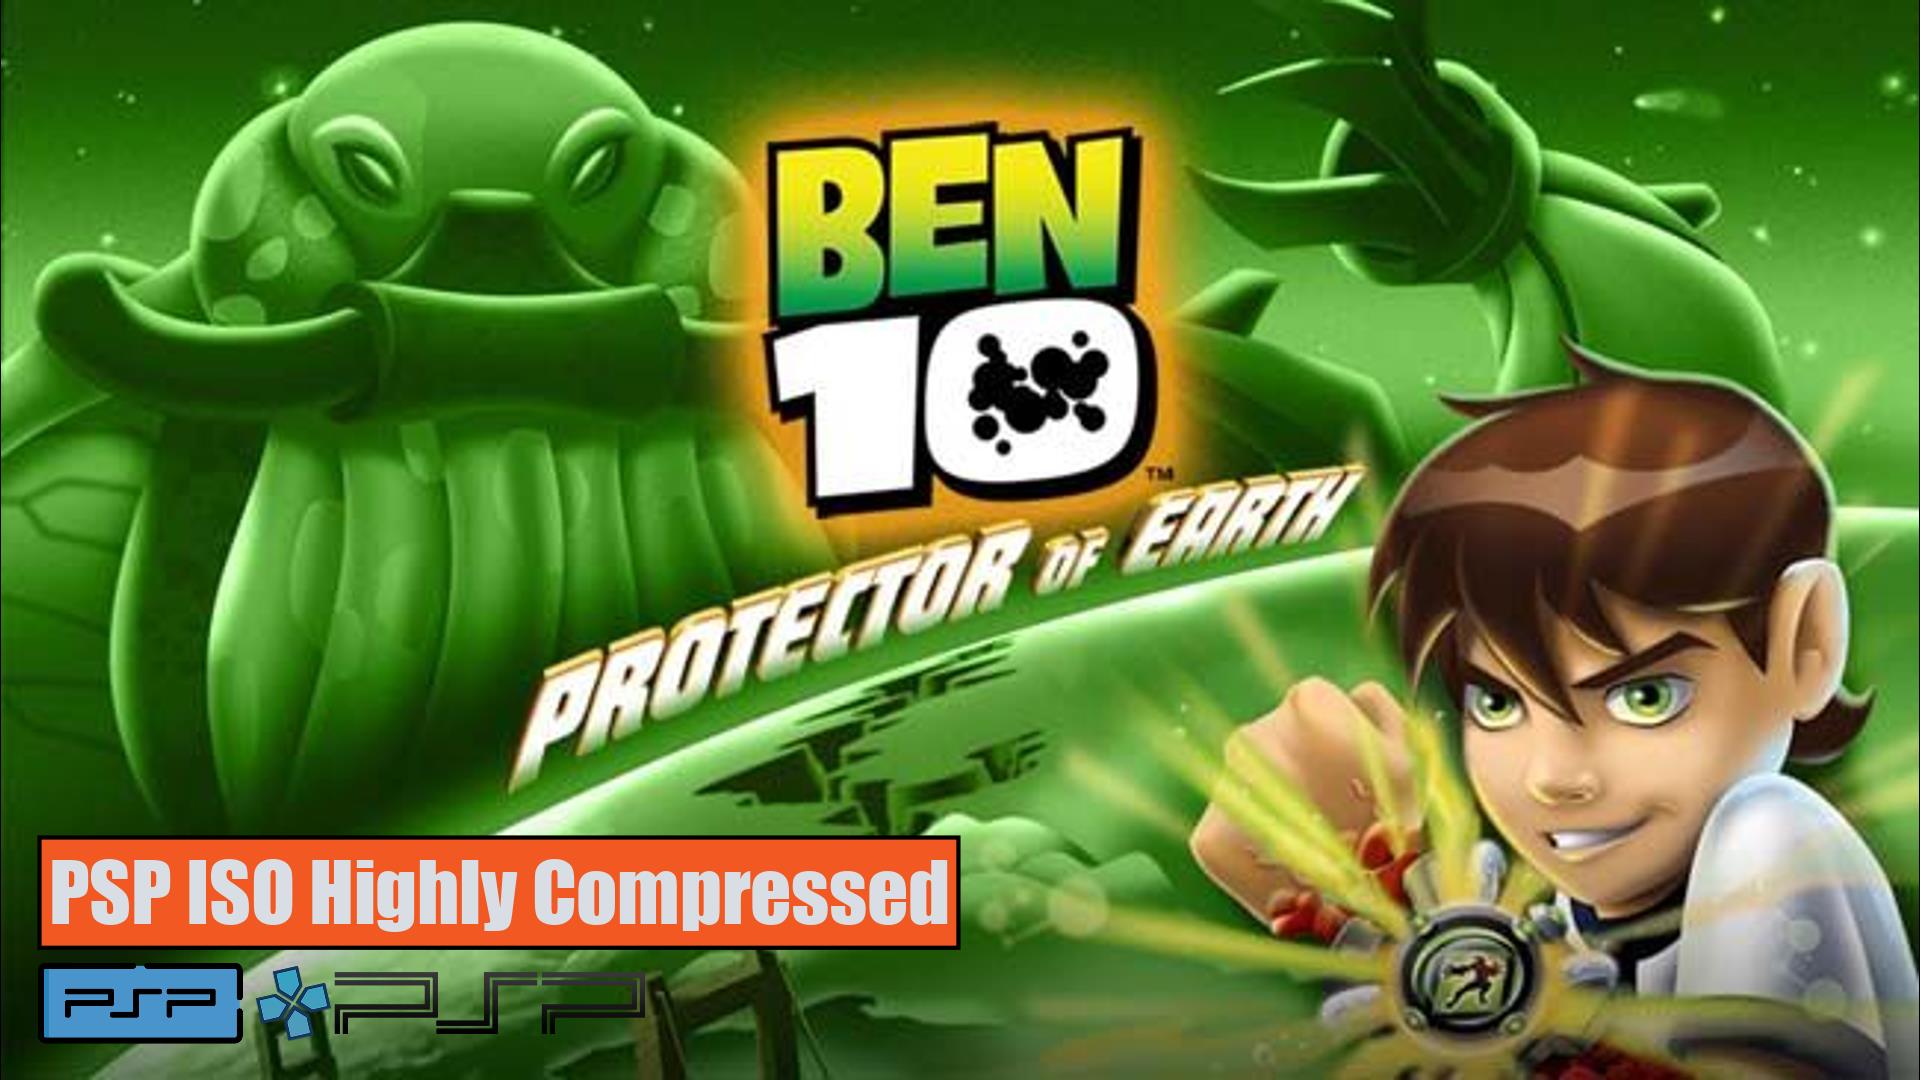 Ben 10 Protector Of Earth PPSSPP ISO Zip File Download Highly Compressed